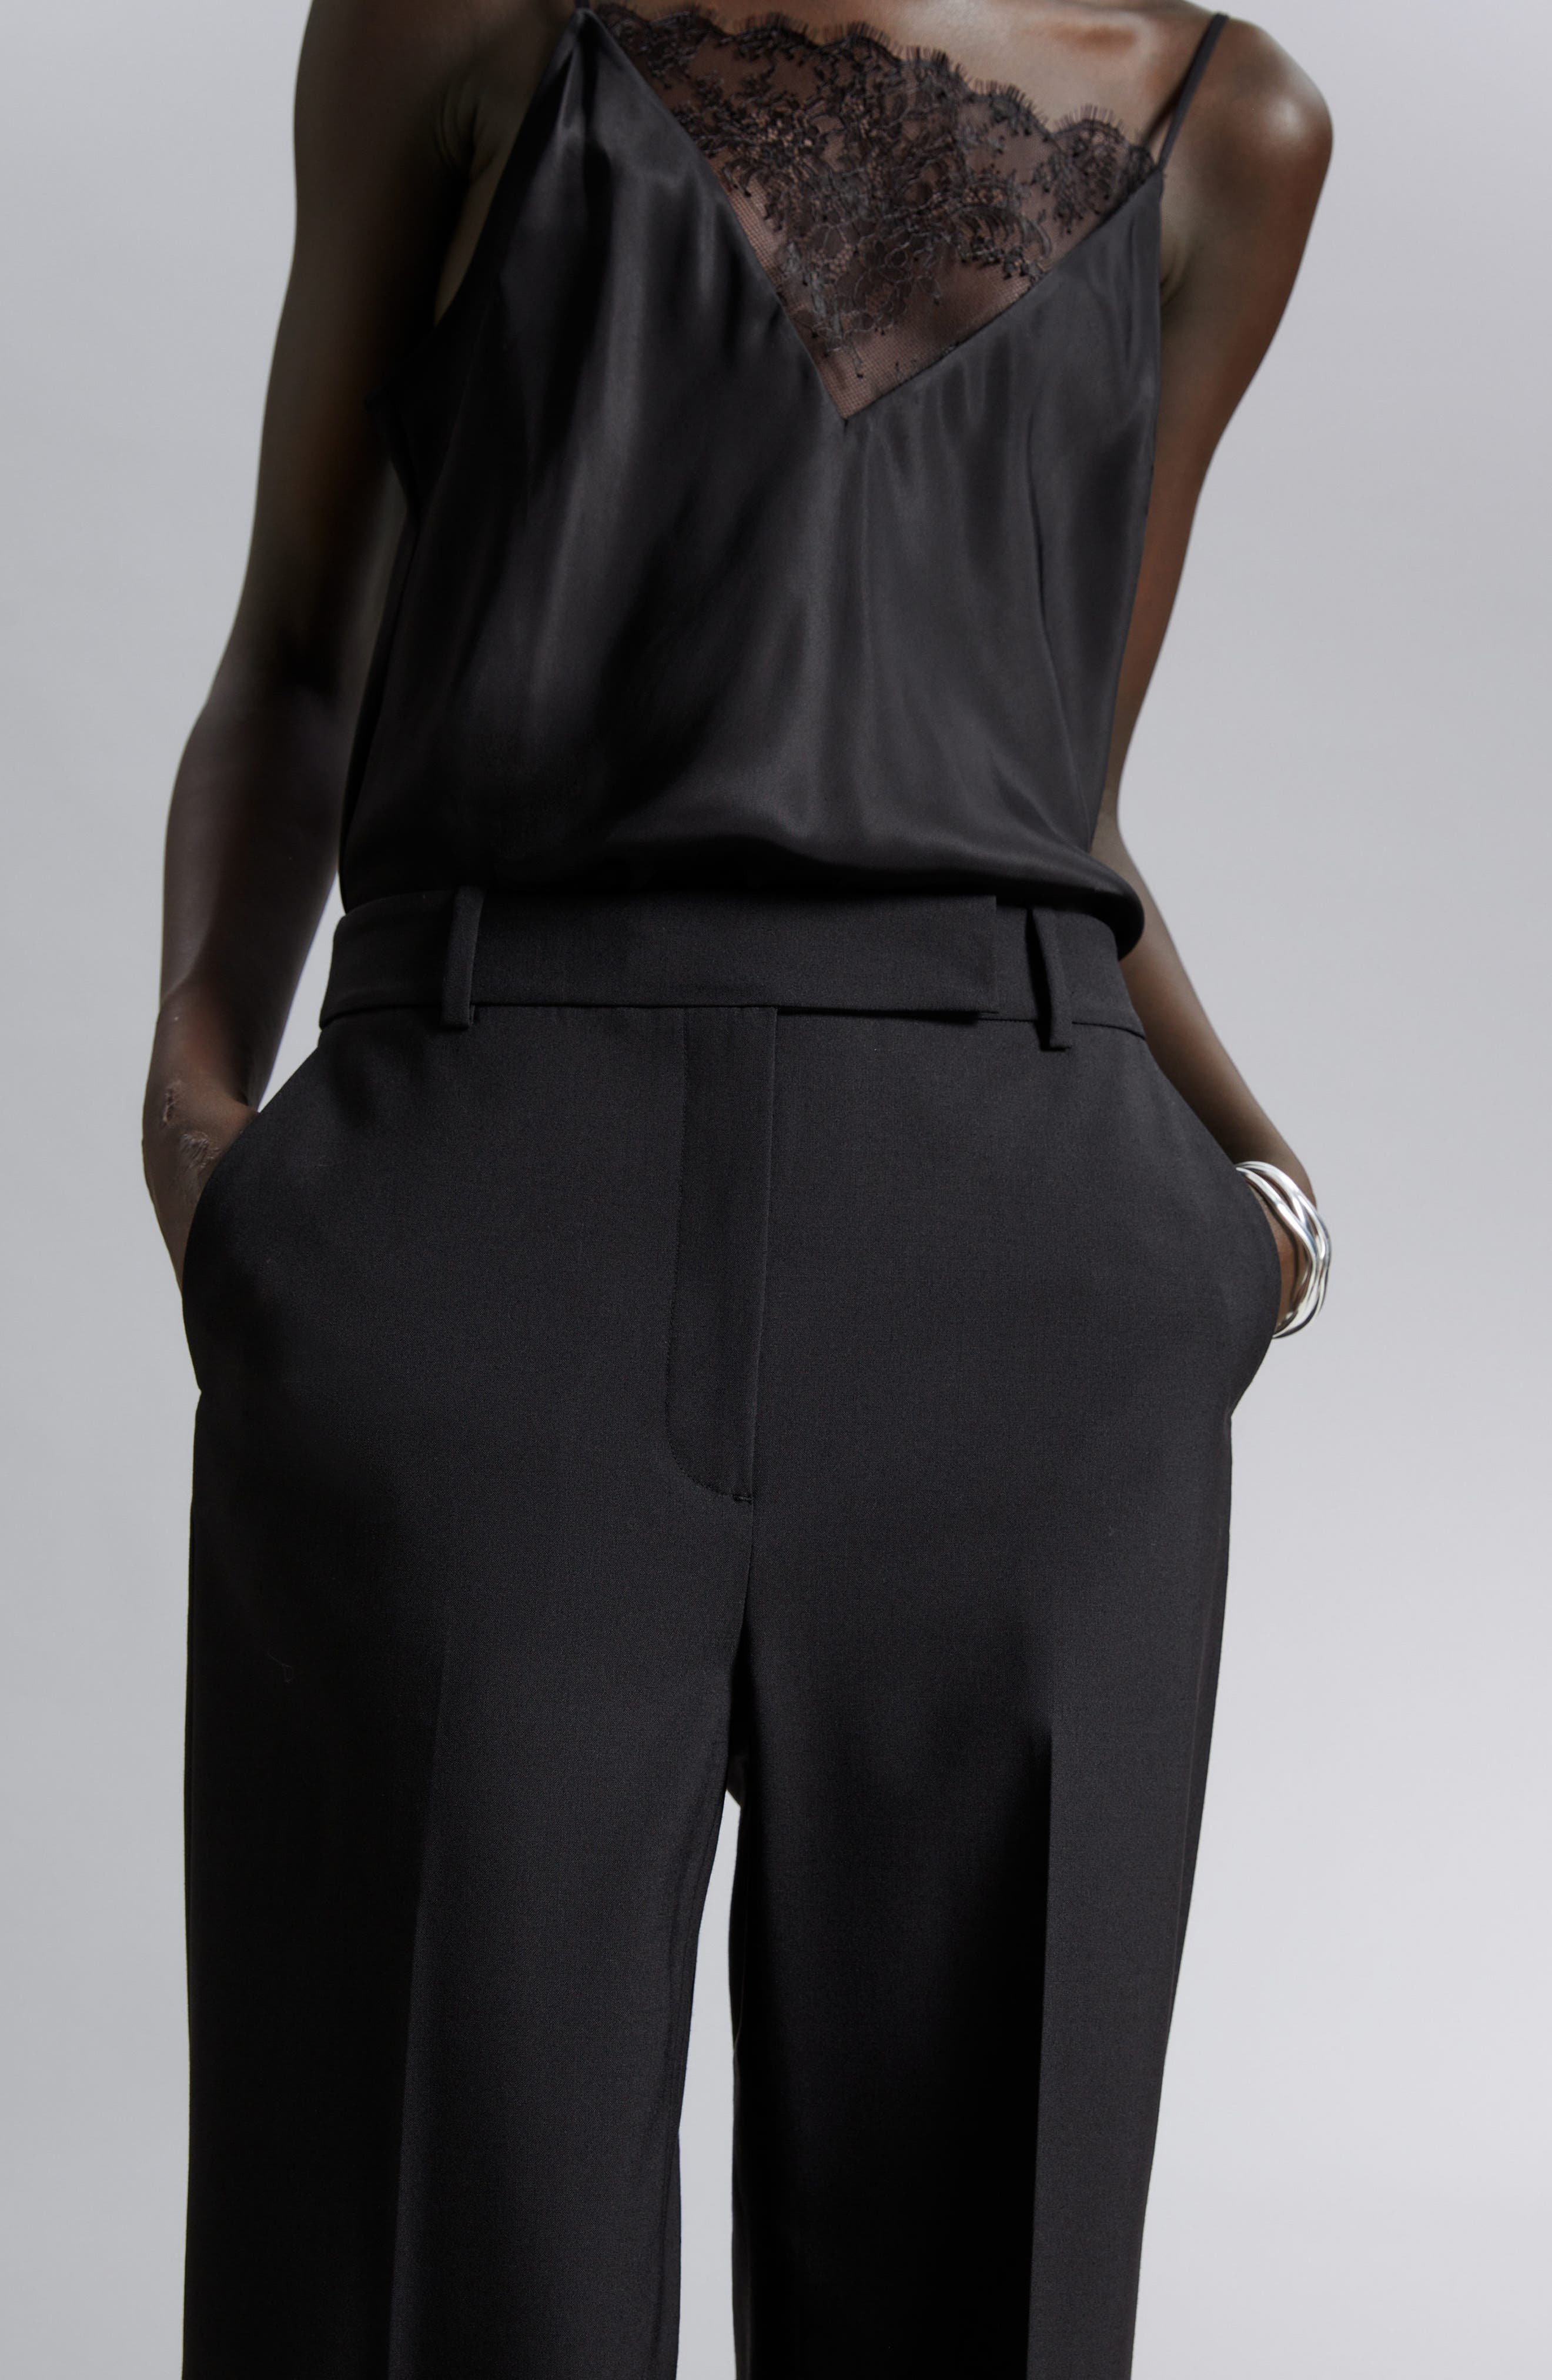  Other Stories High Waist Wide Leg Trousers in Black